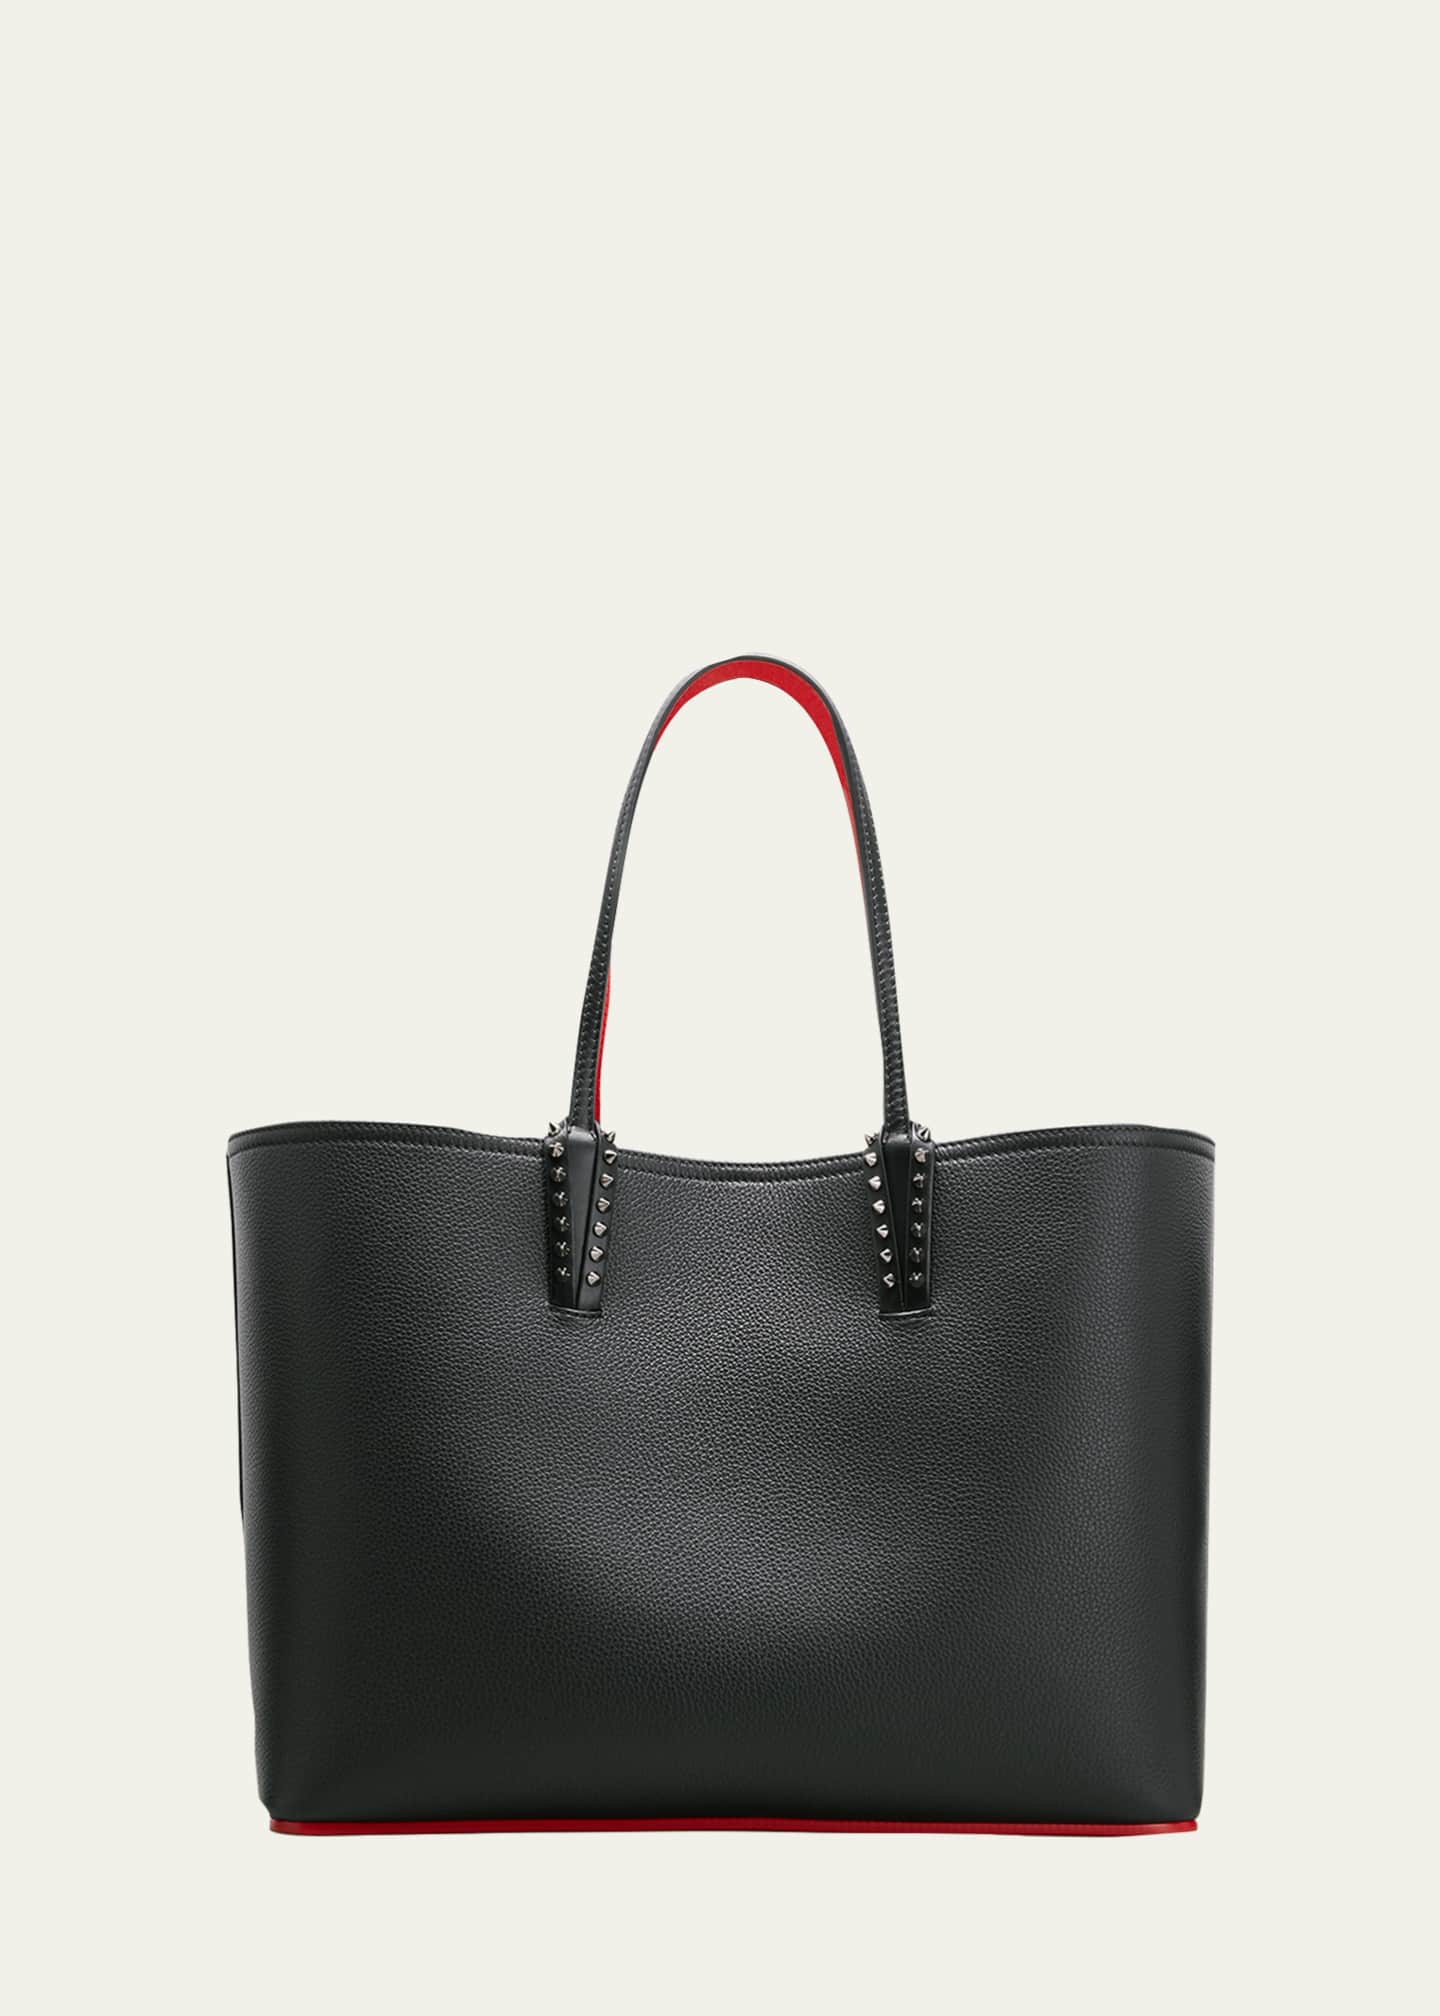 Cabata East-West Leather Tote Bag